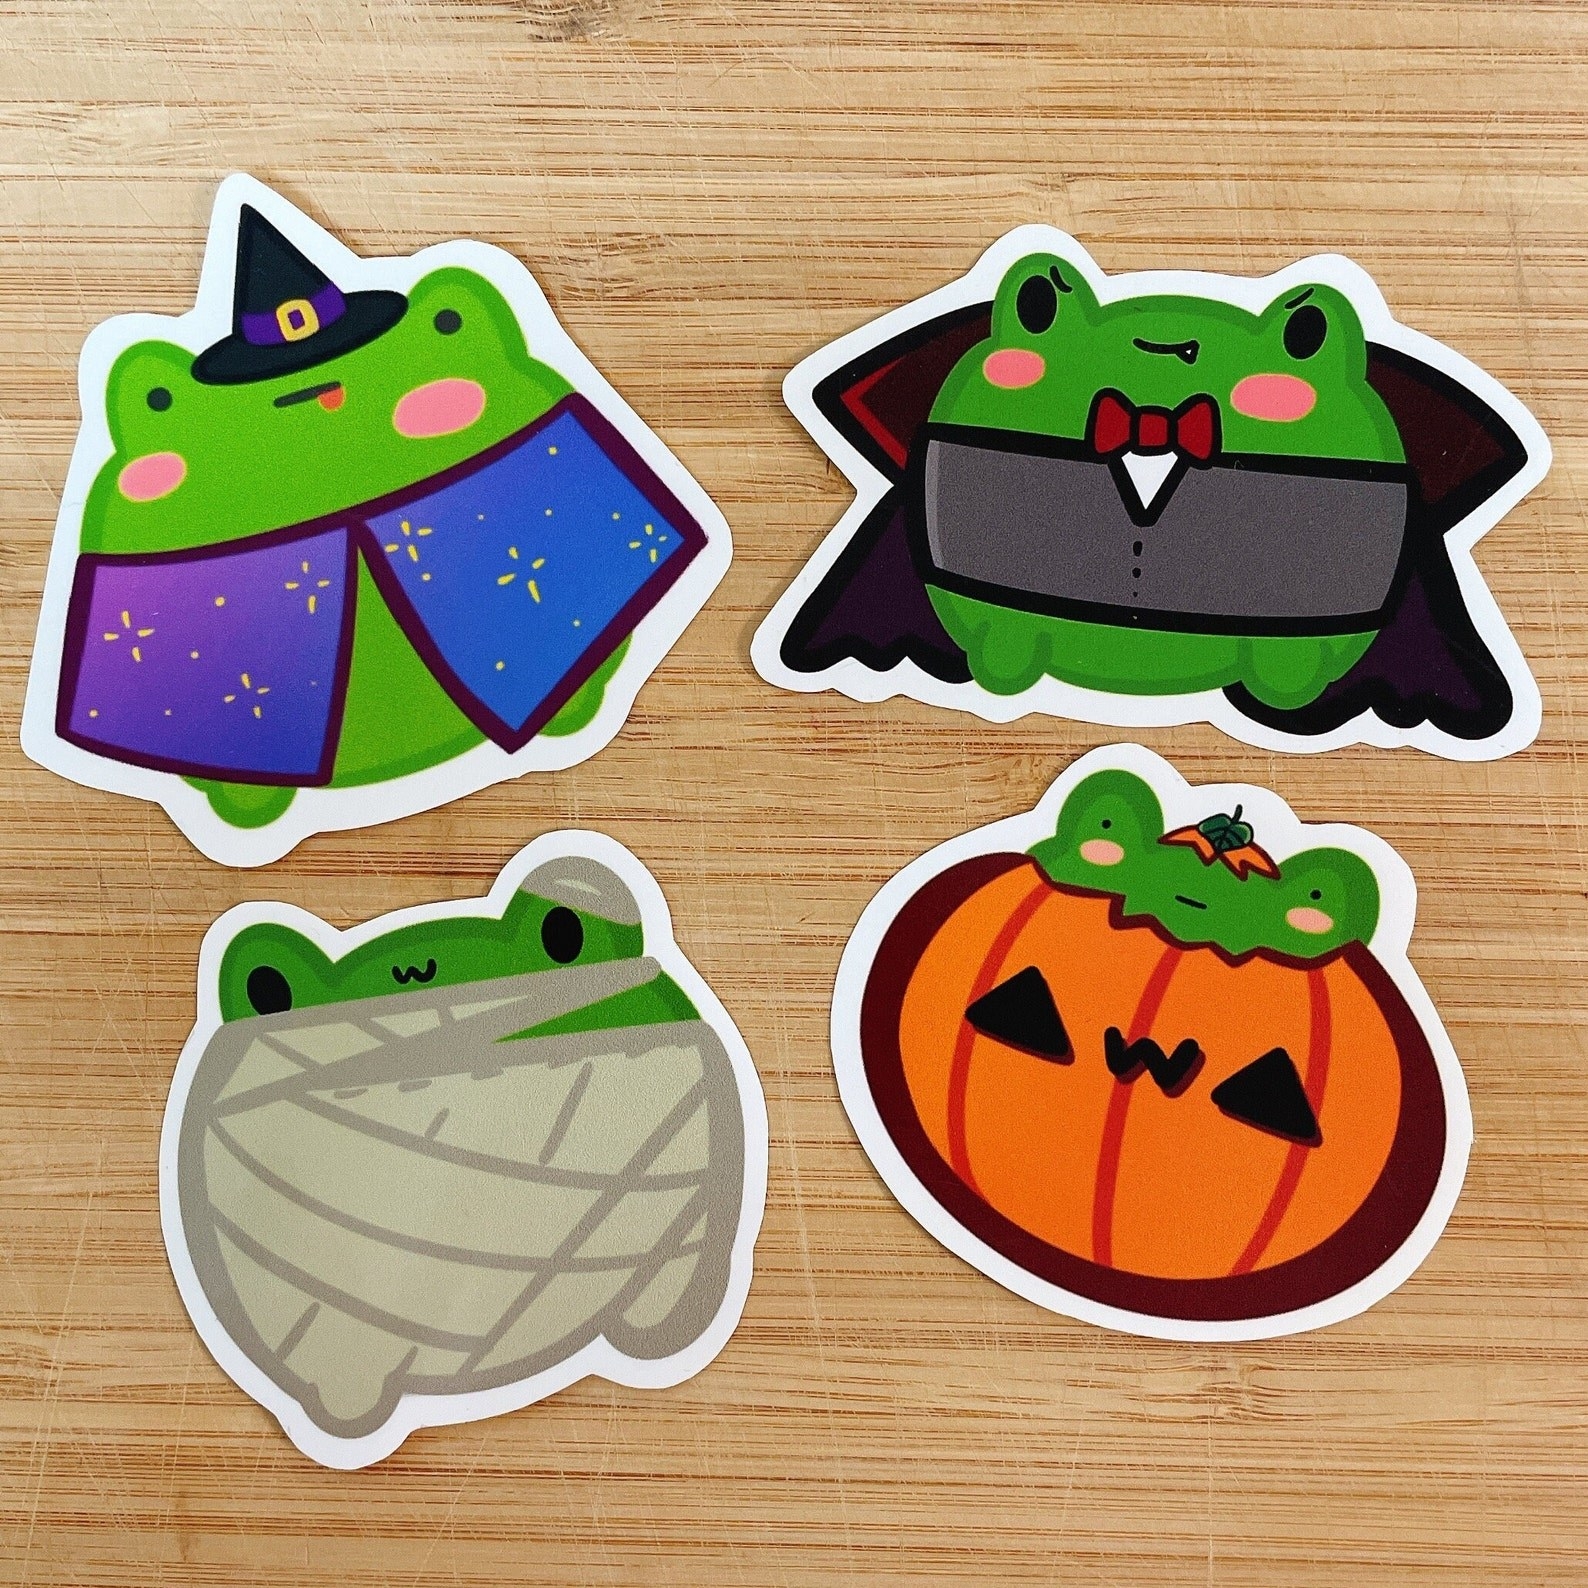 Four frogs dressed in a wizard costume, vampire costume, mummy costume, and pumpkin costume.